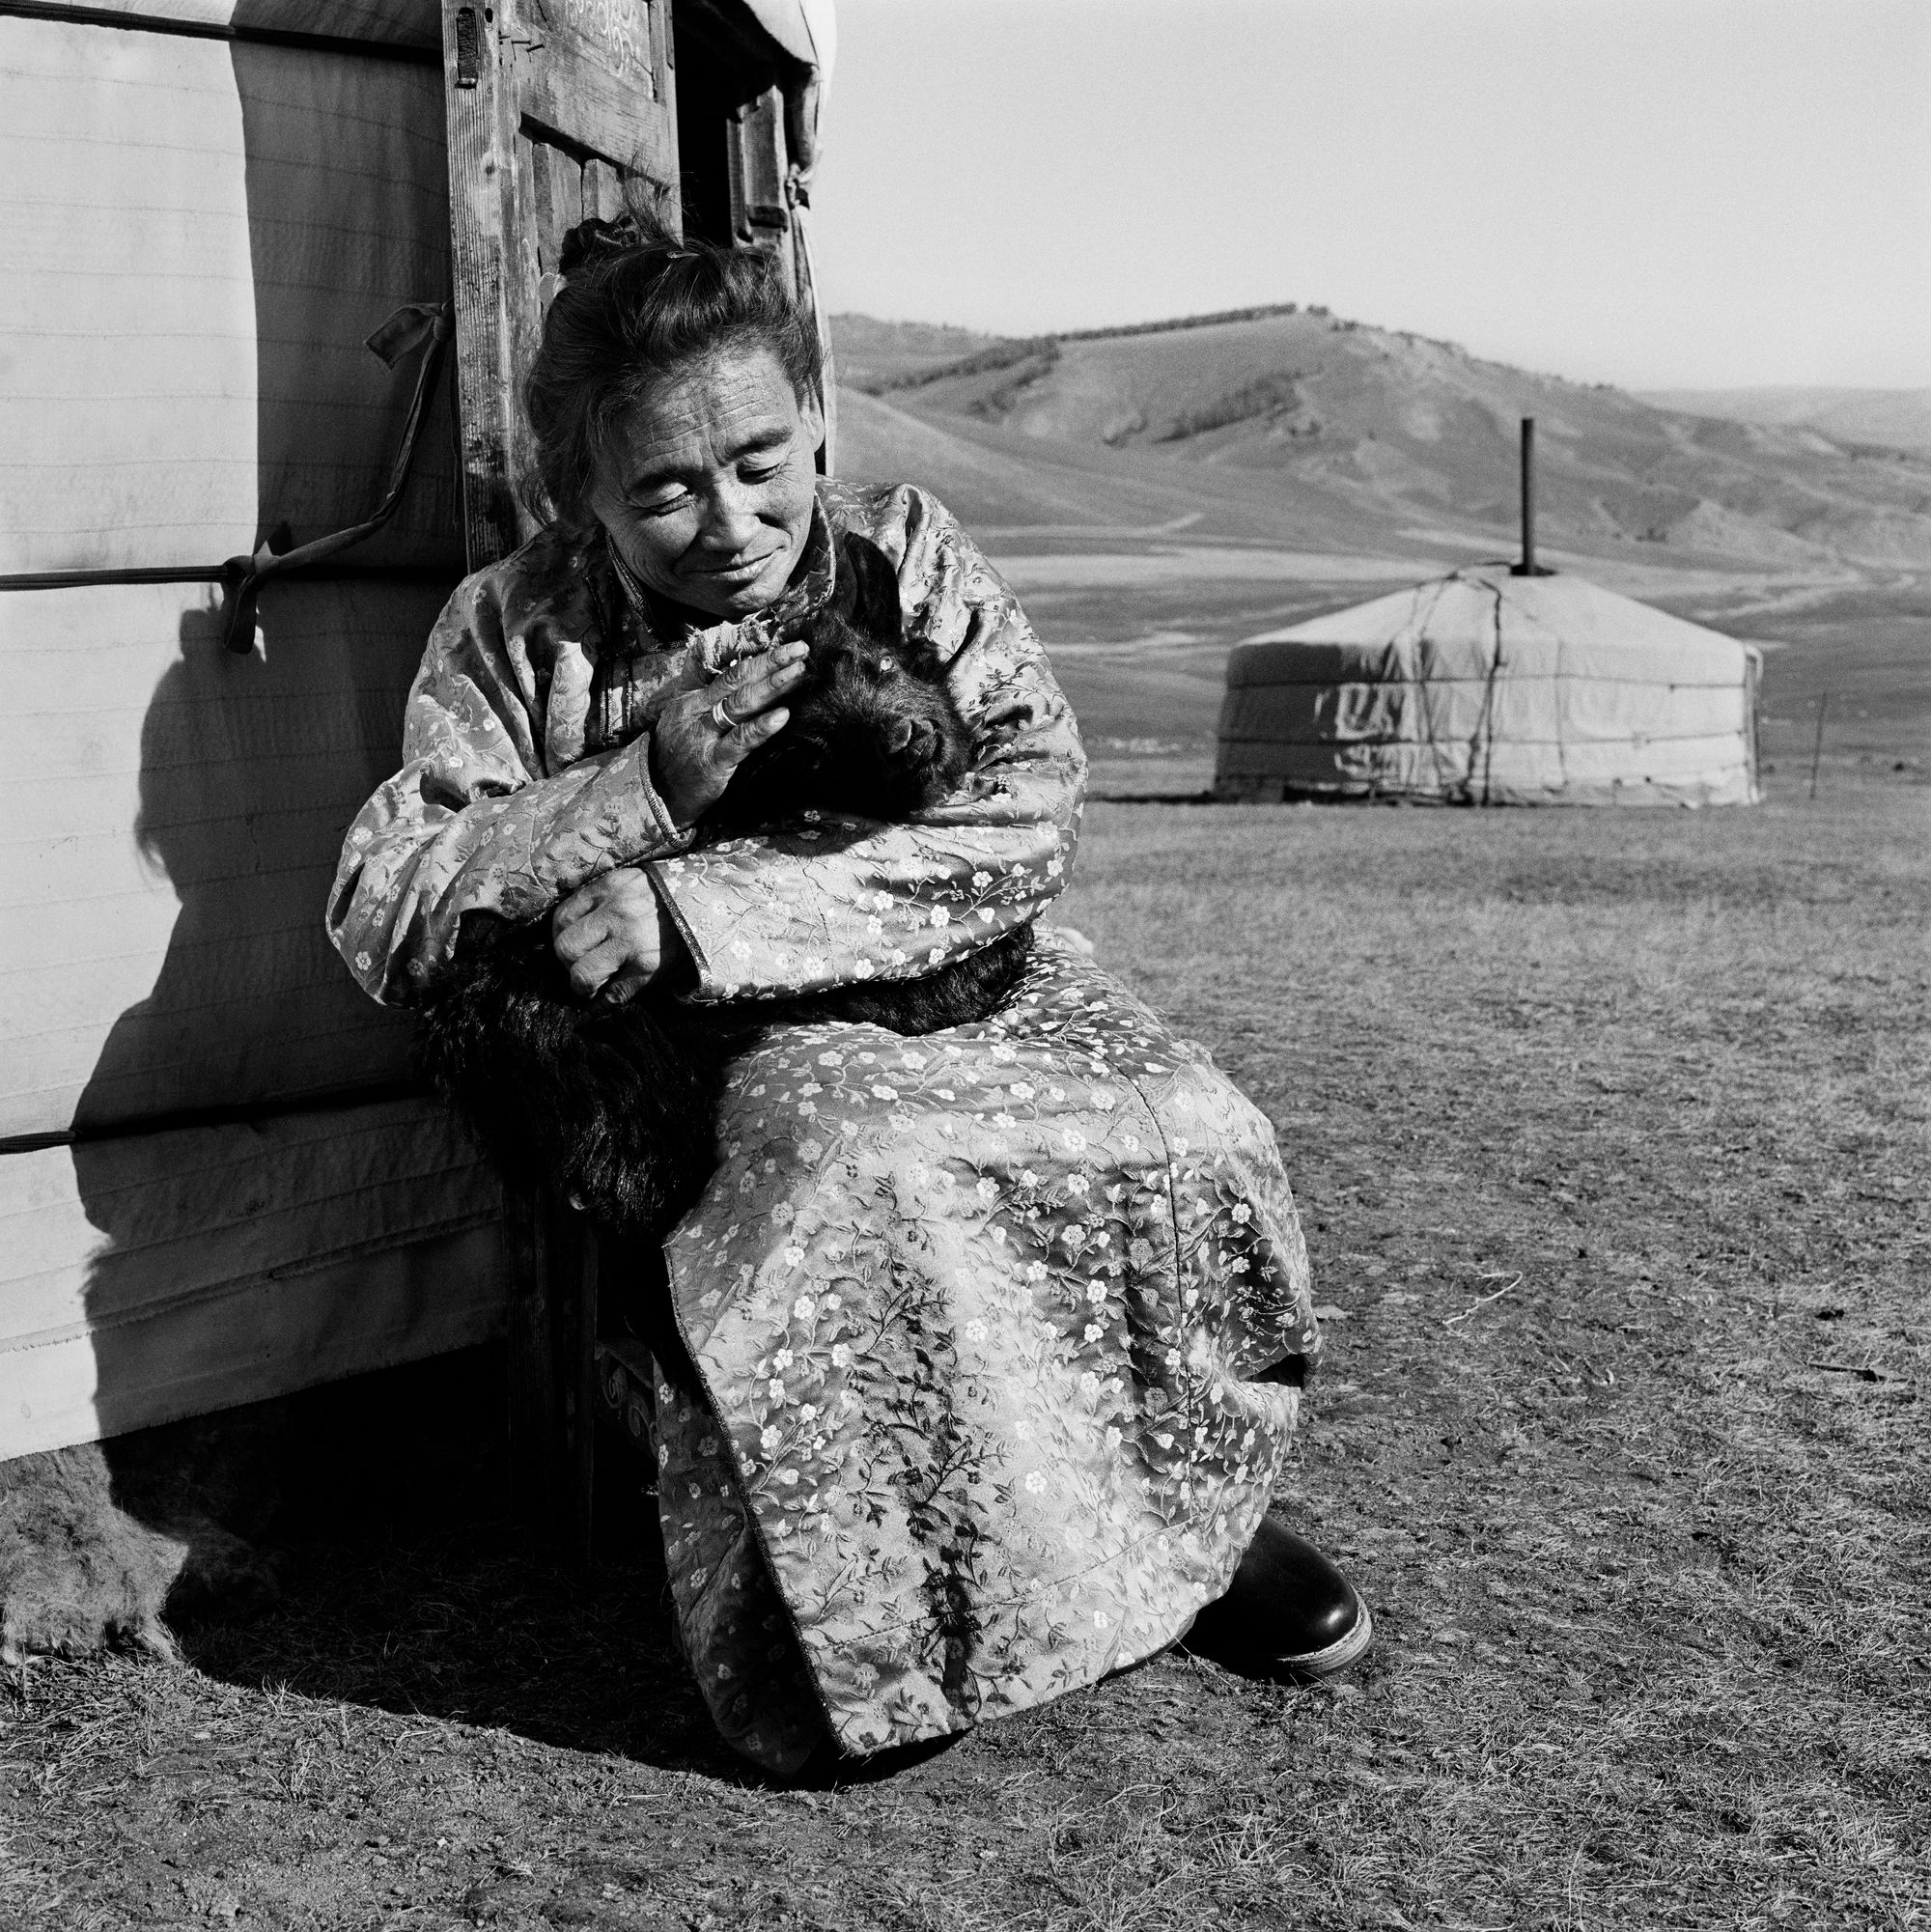 Black and white photo of an older woman, looking tenderly at the small goat in her hands. She wears a body-length jacket patterned with flowers. She sits by a yurt, with another visible in the background, hills stretching behind it.